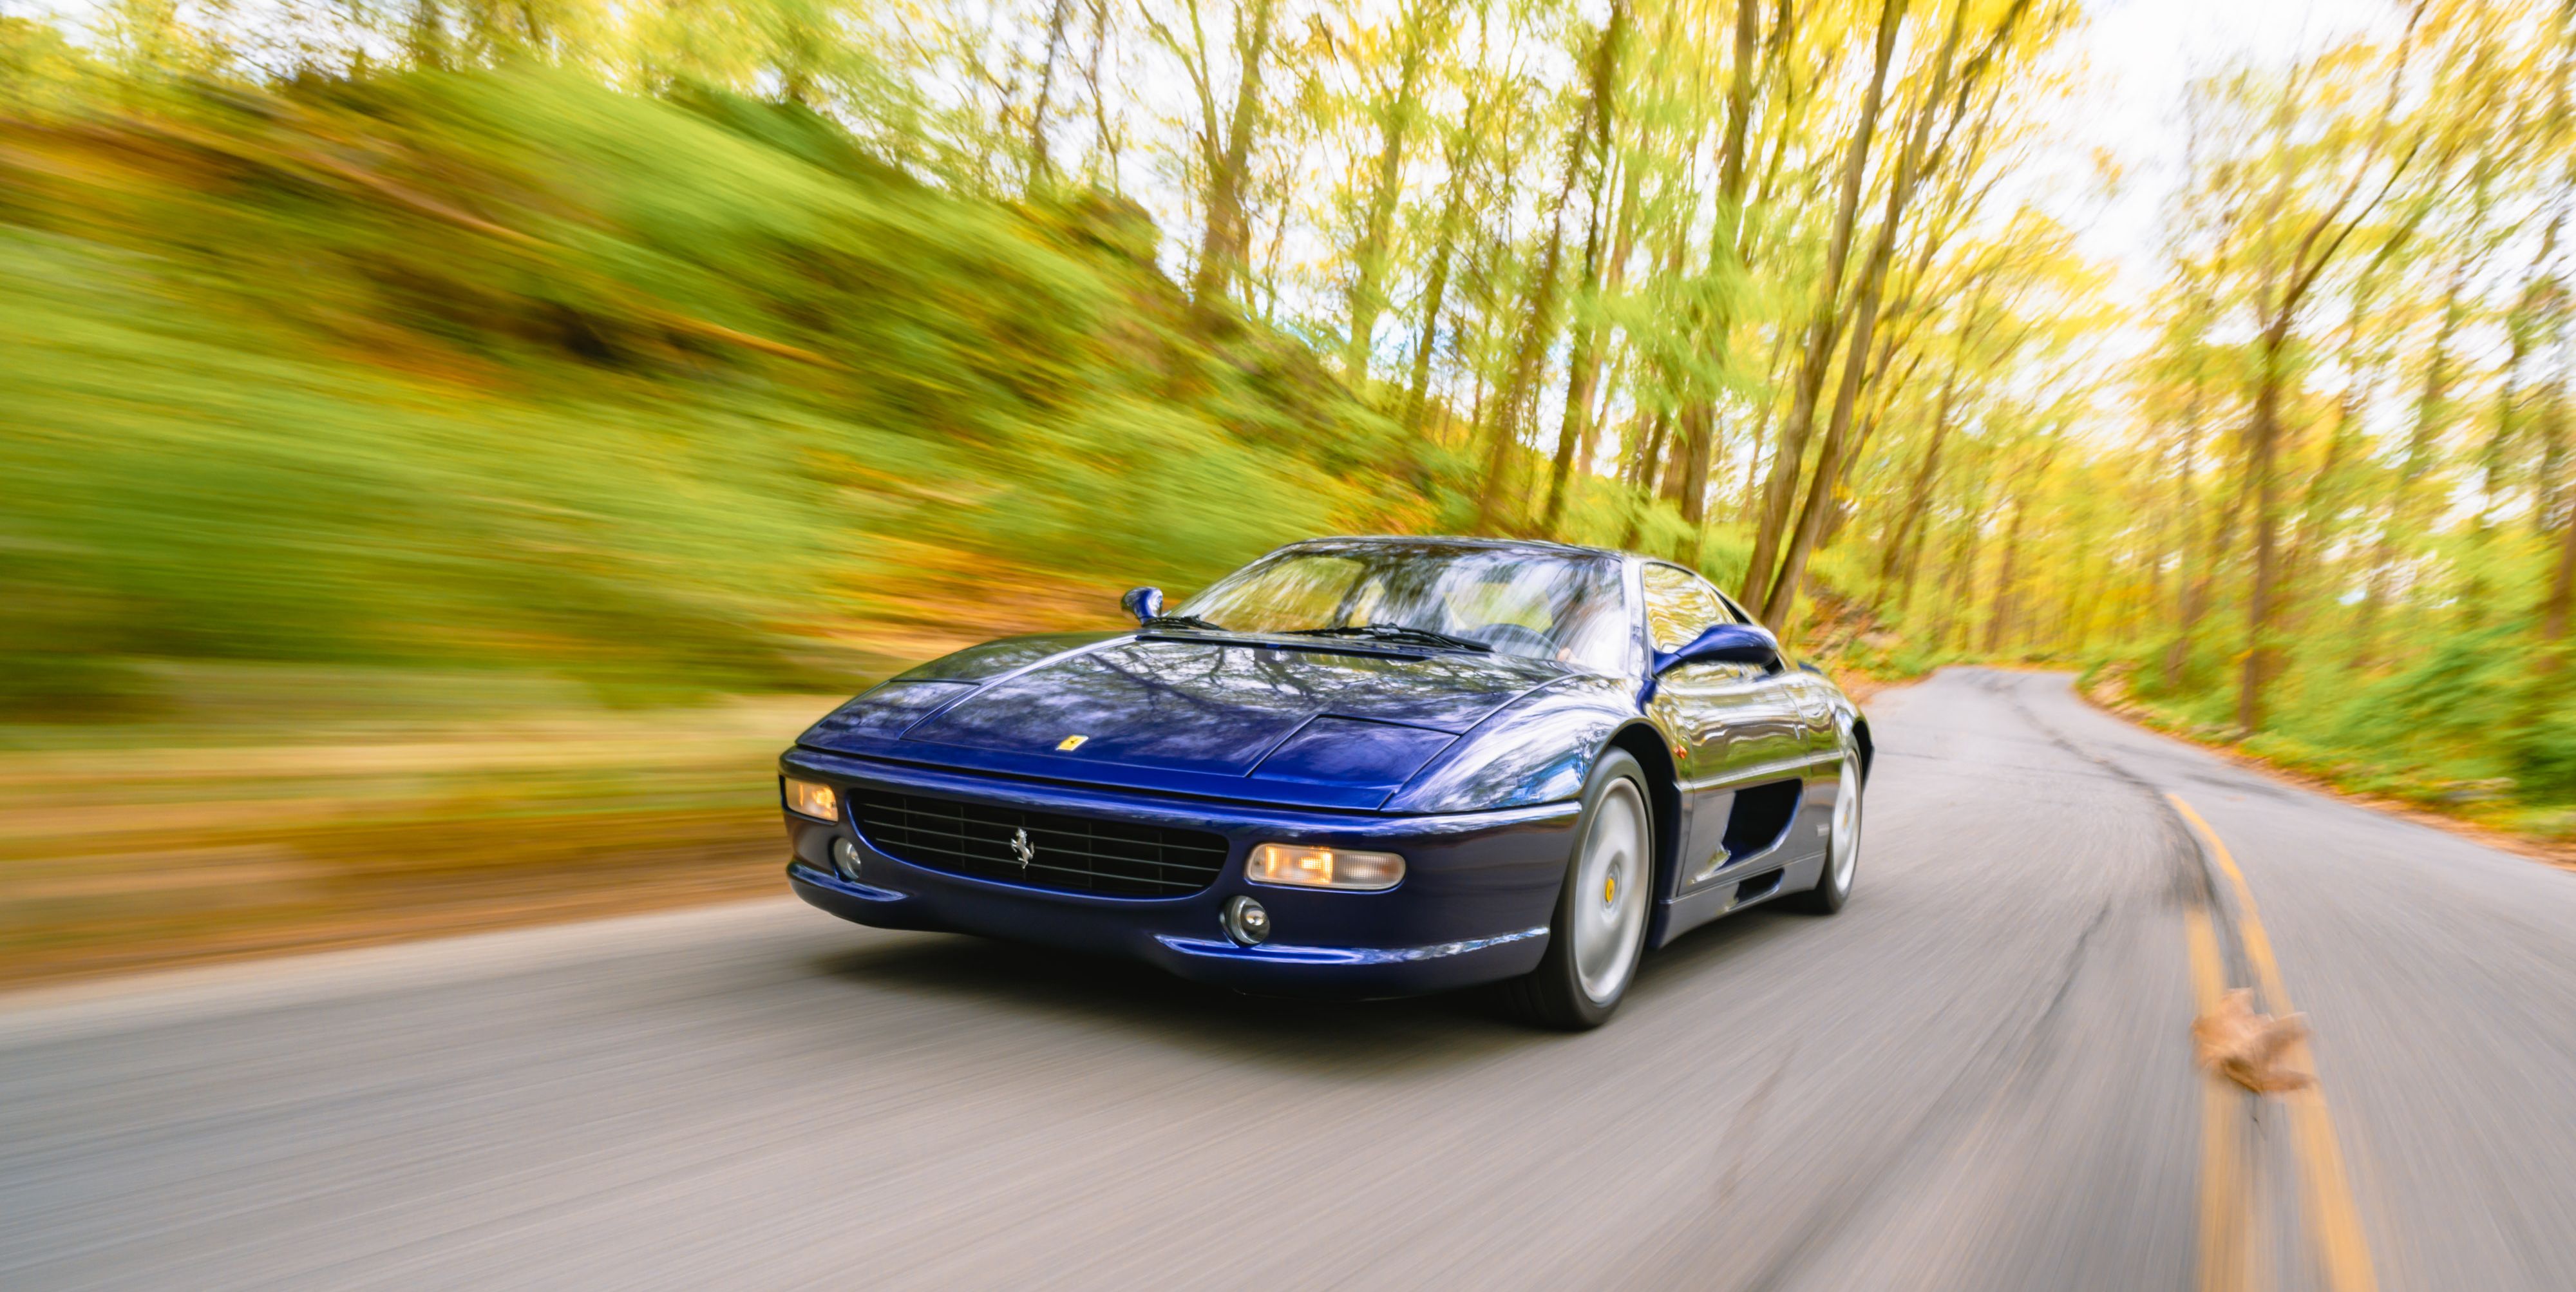 The Ferrari F355 Is the Perfect One-Time Supercar Experience